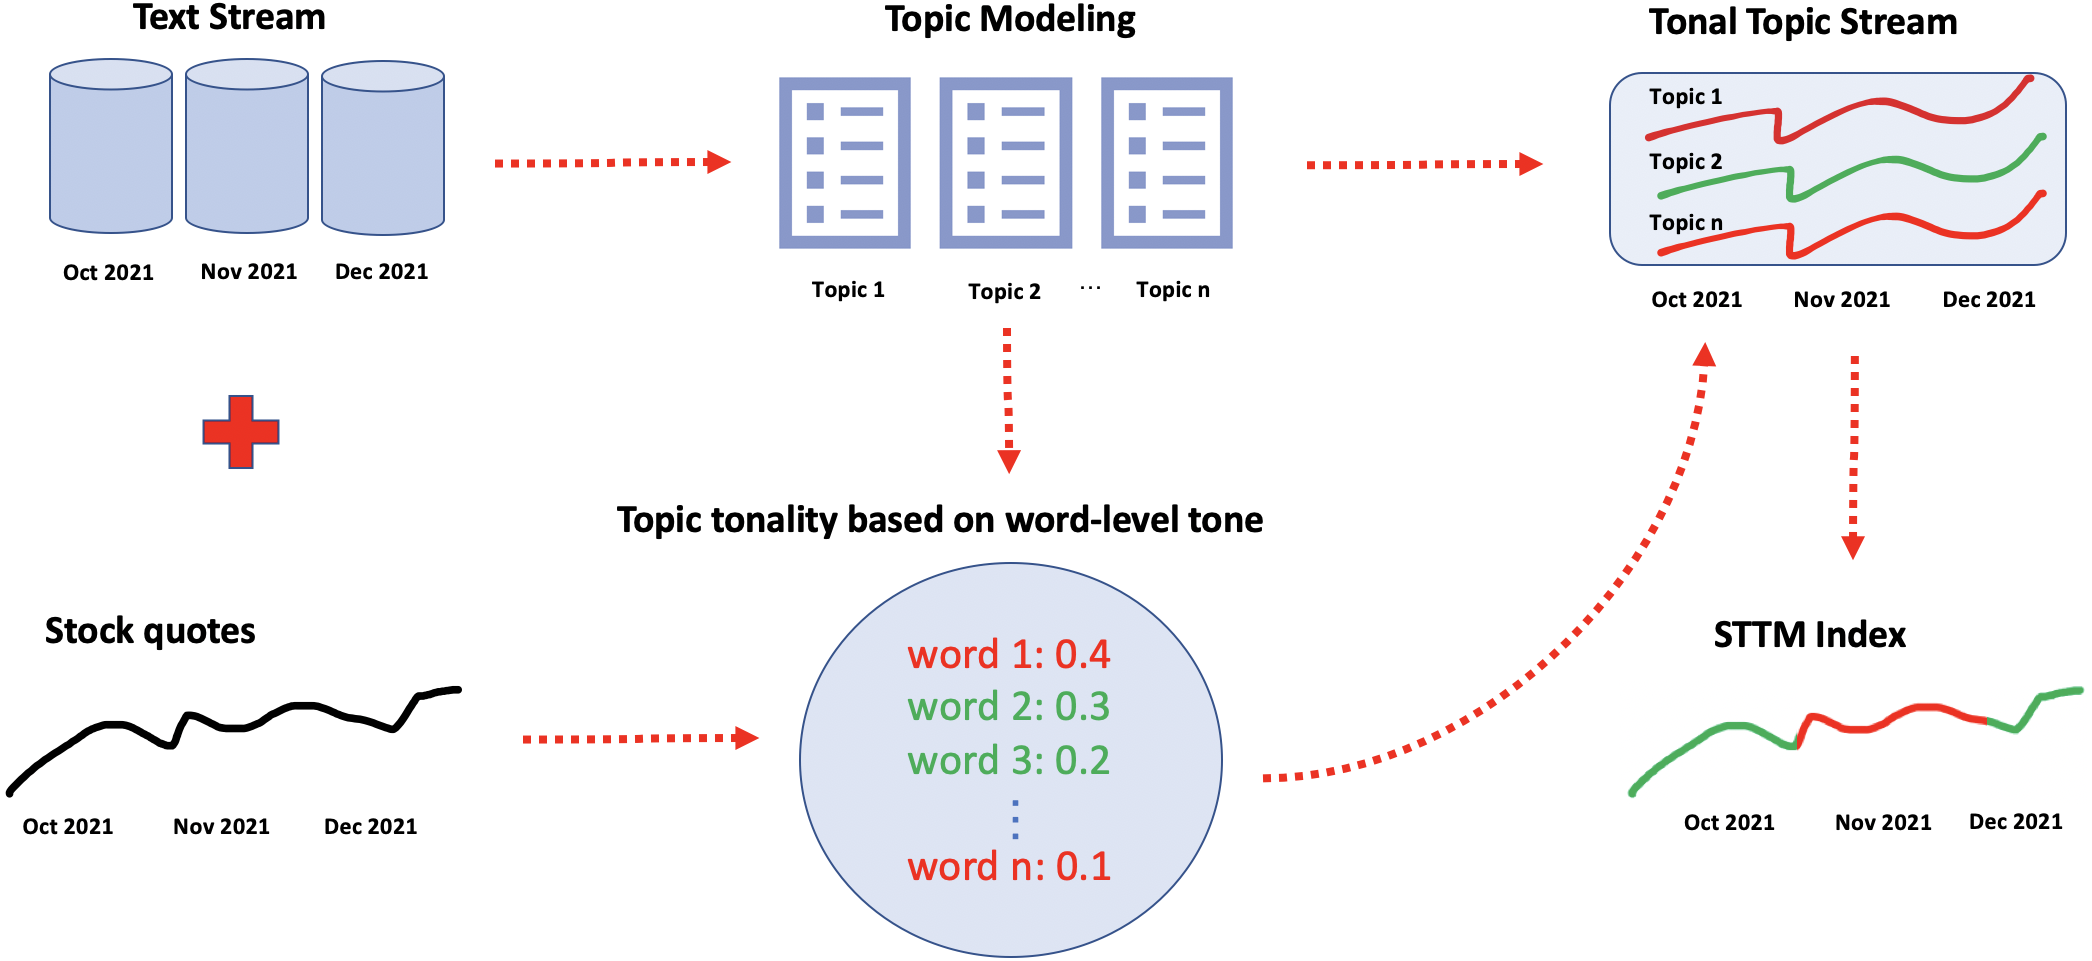 Topic modeling